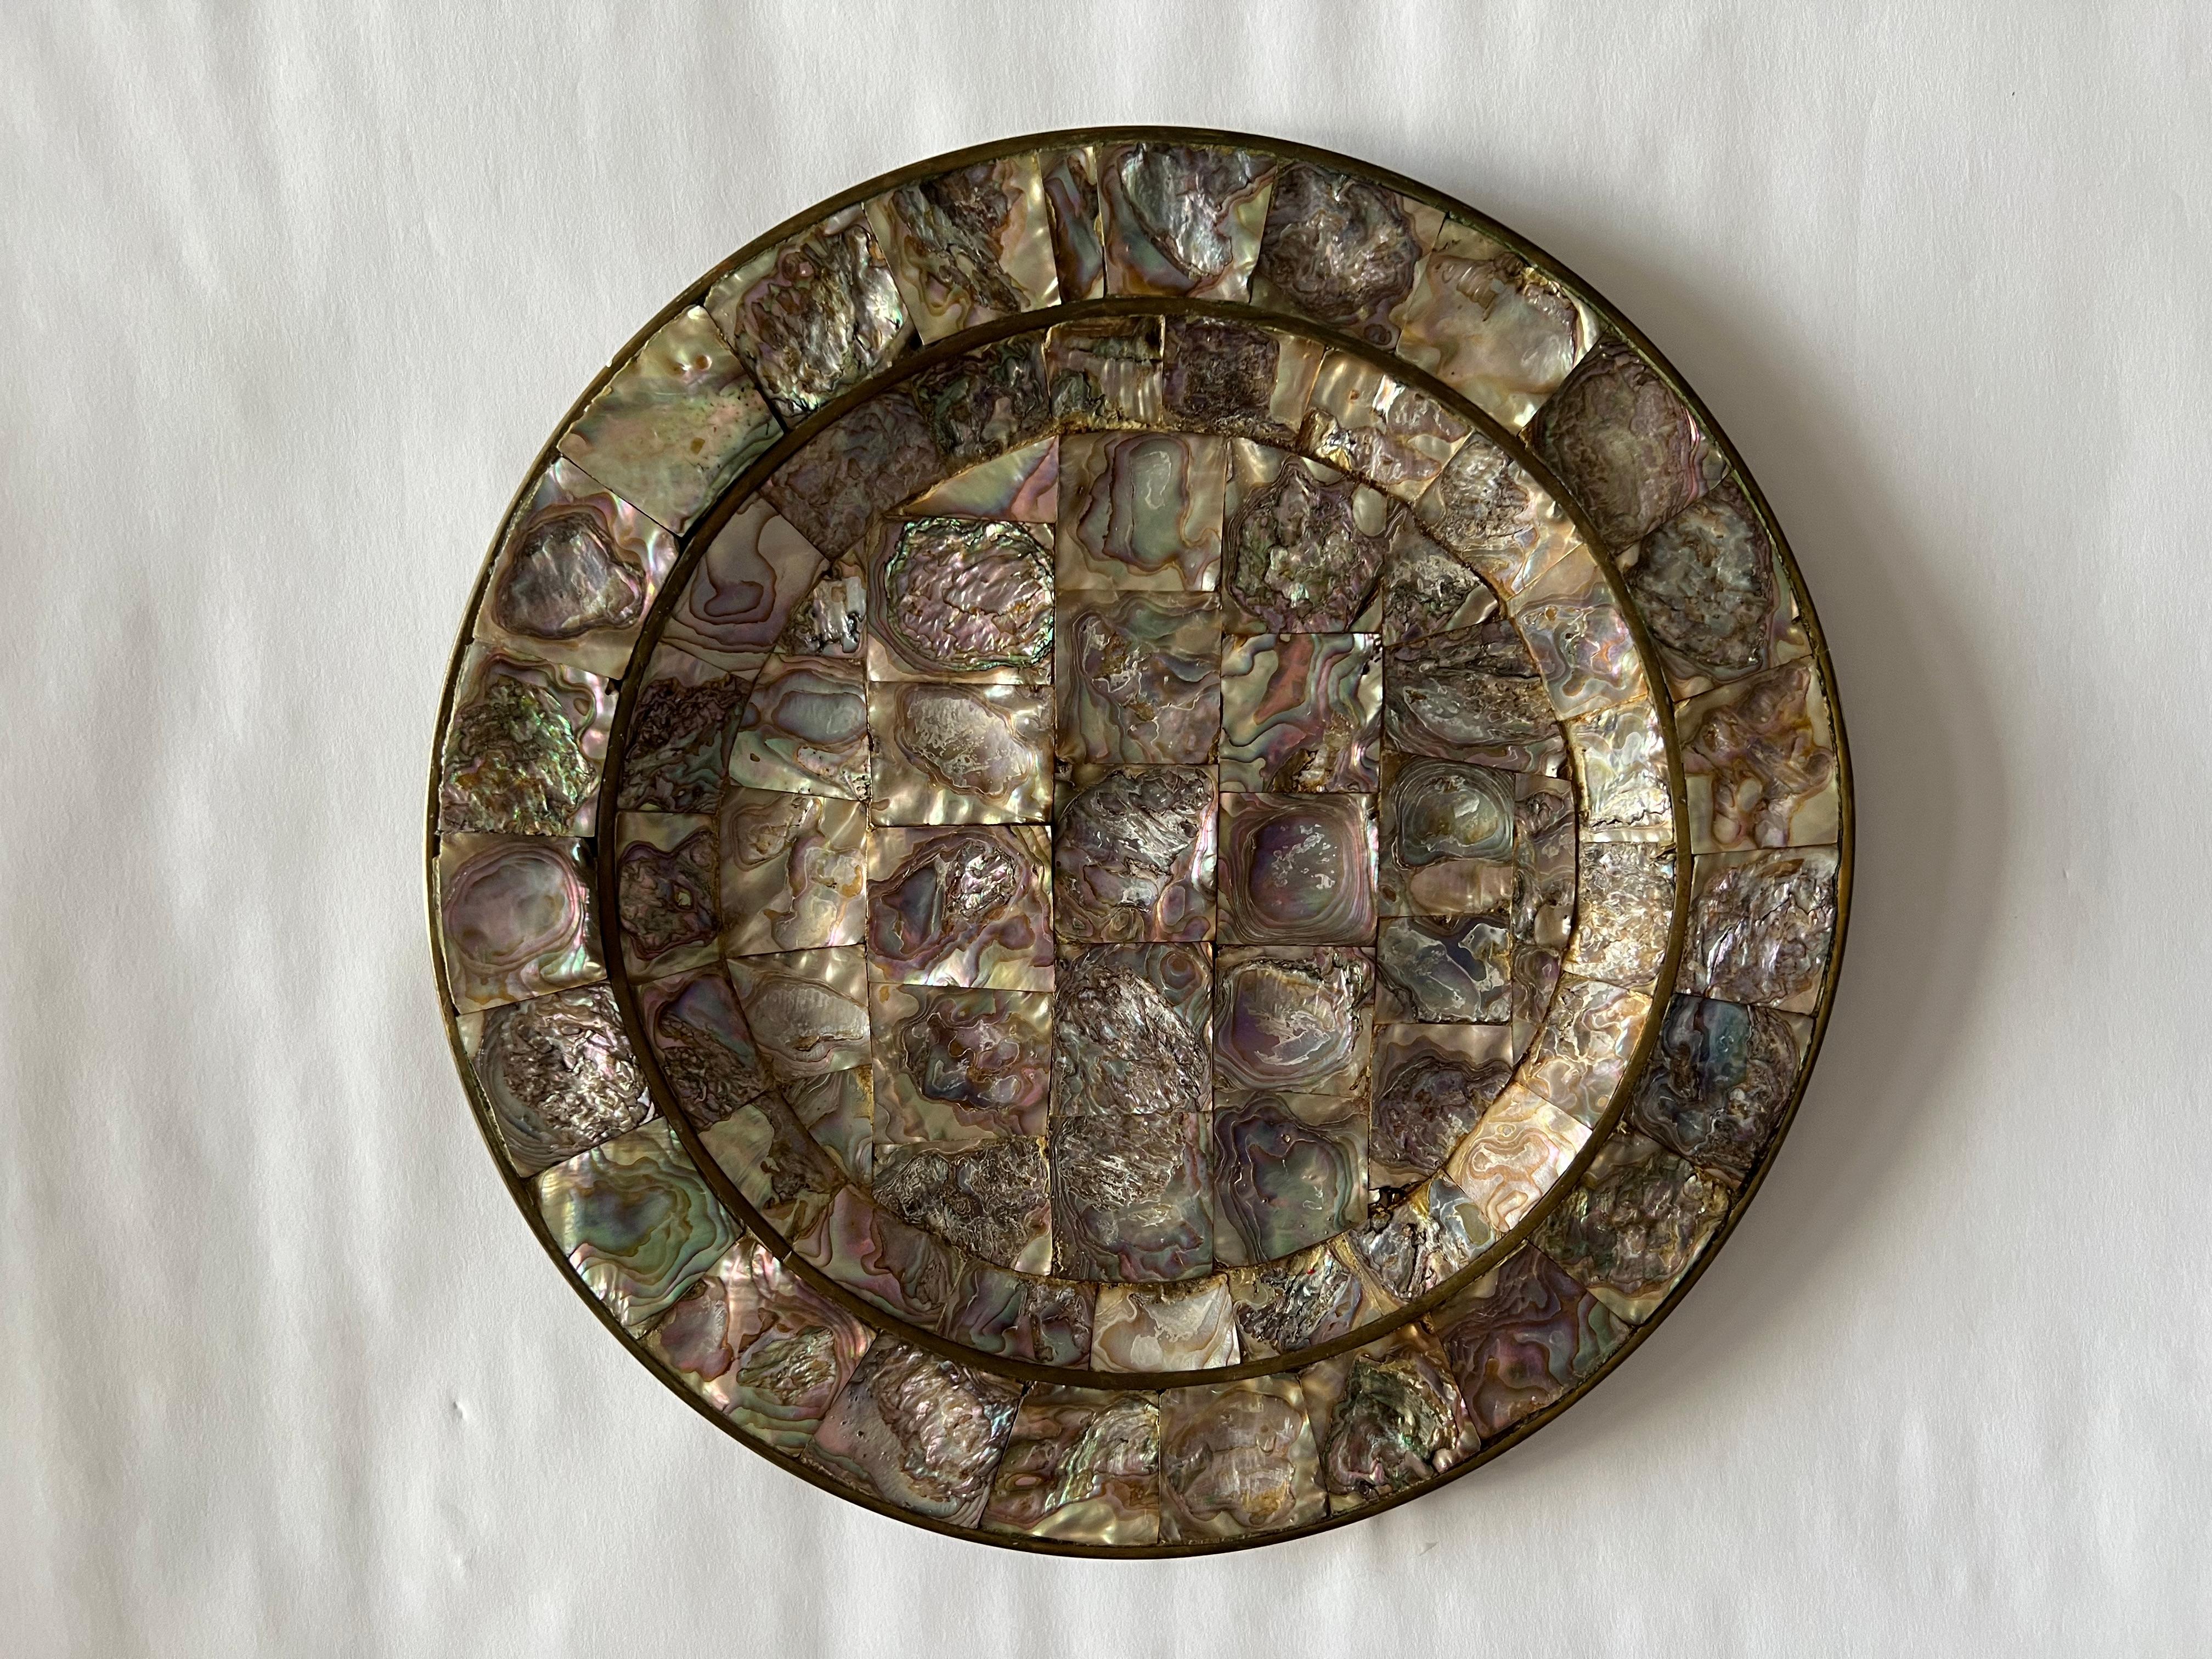 Los Castillos Style Mosaic of Abalone Shells on Copper Platter, 1950s, Mexico For Sale 4